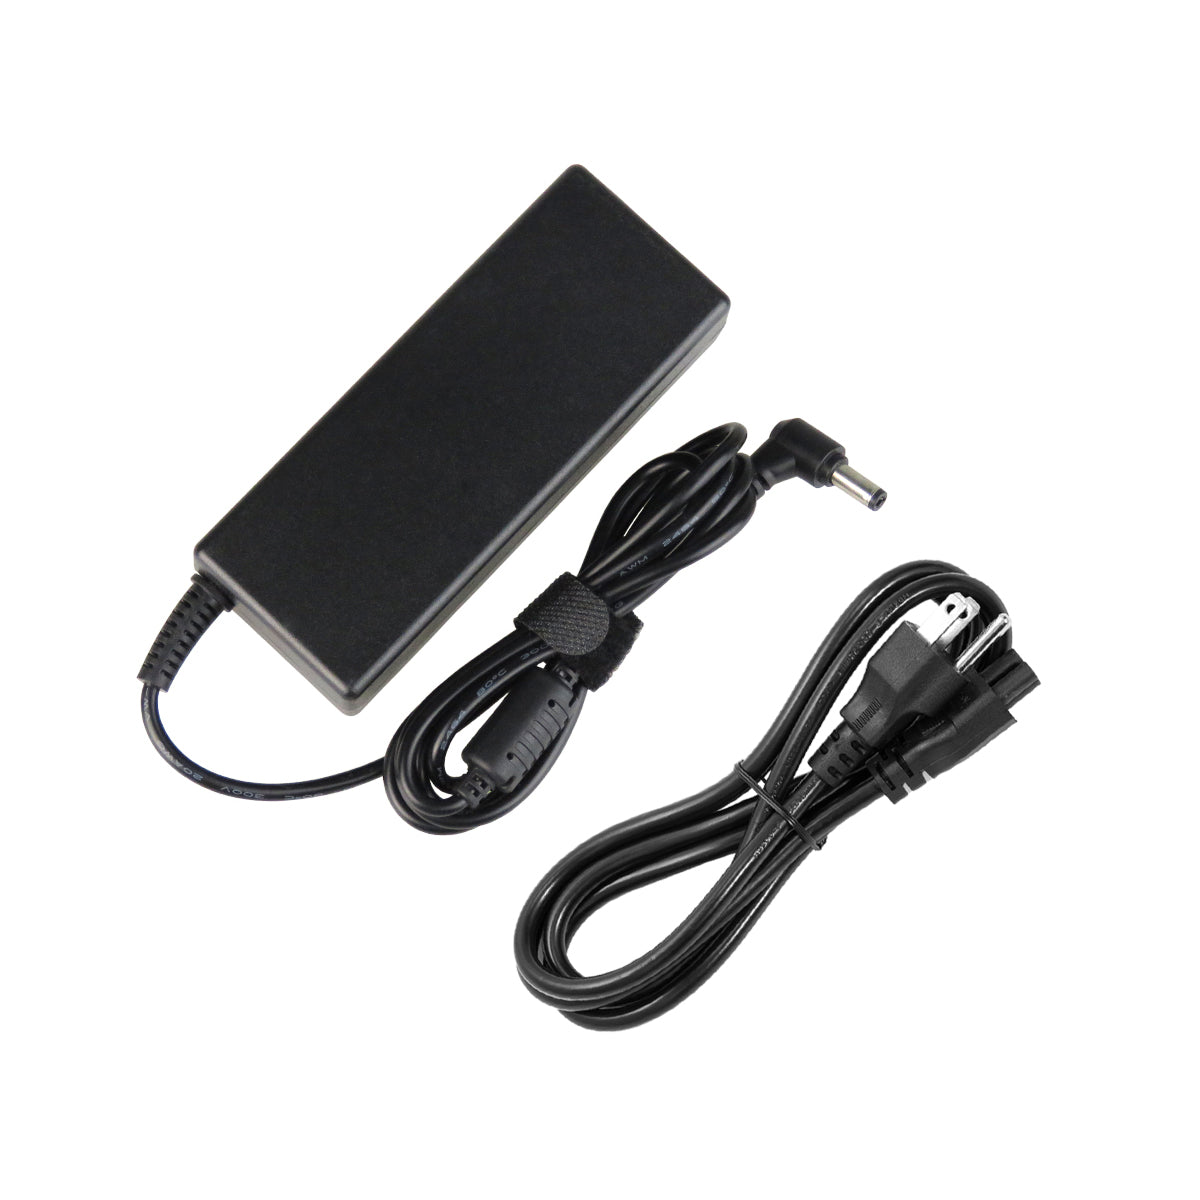 AC Adapter Charger for Toshiba Satellite p775 Notebook.